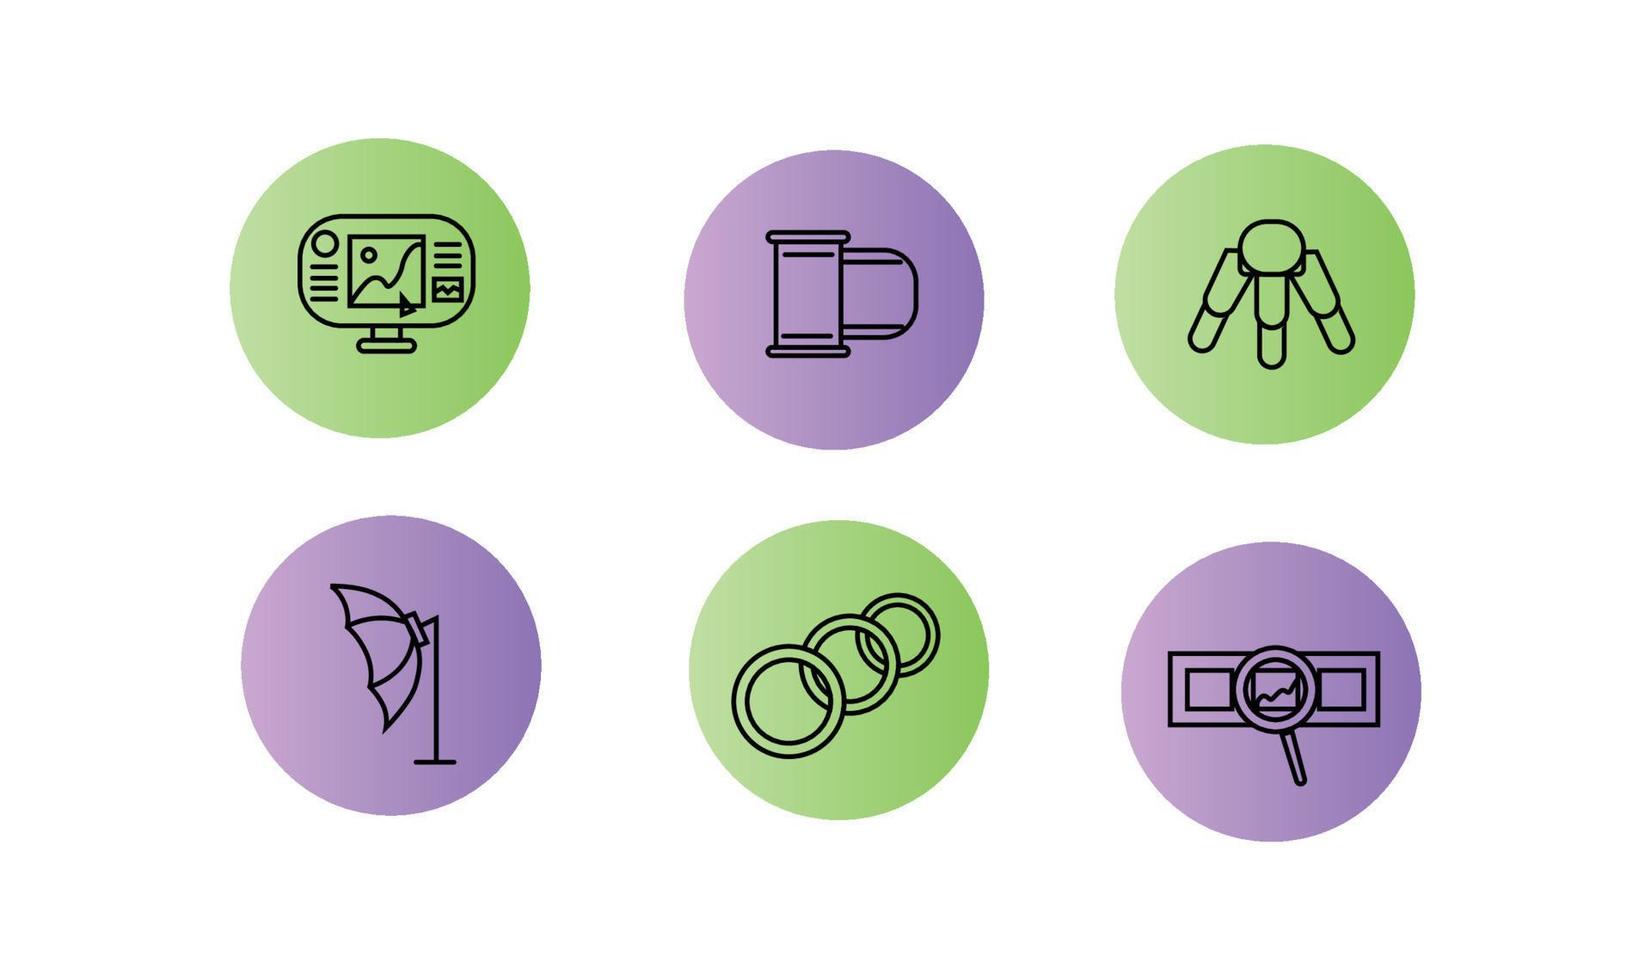 Icons photographer. Photographer equipment icons set colored. Monitor, photographic film, tripod, umbrella-softbox, ring lamp, film with a magnifying glass vector